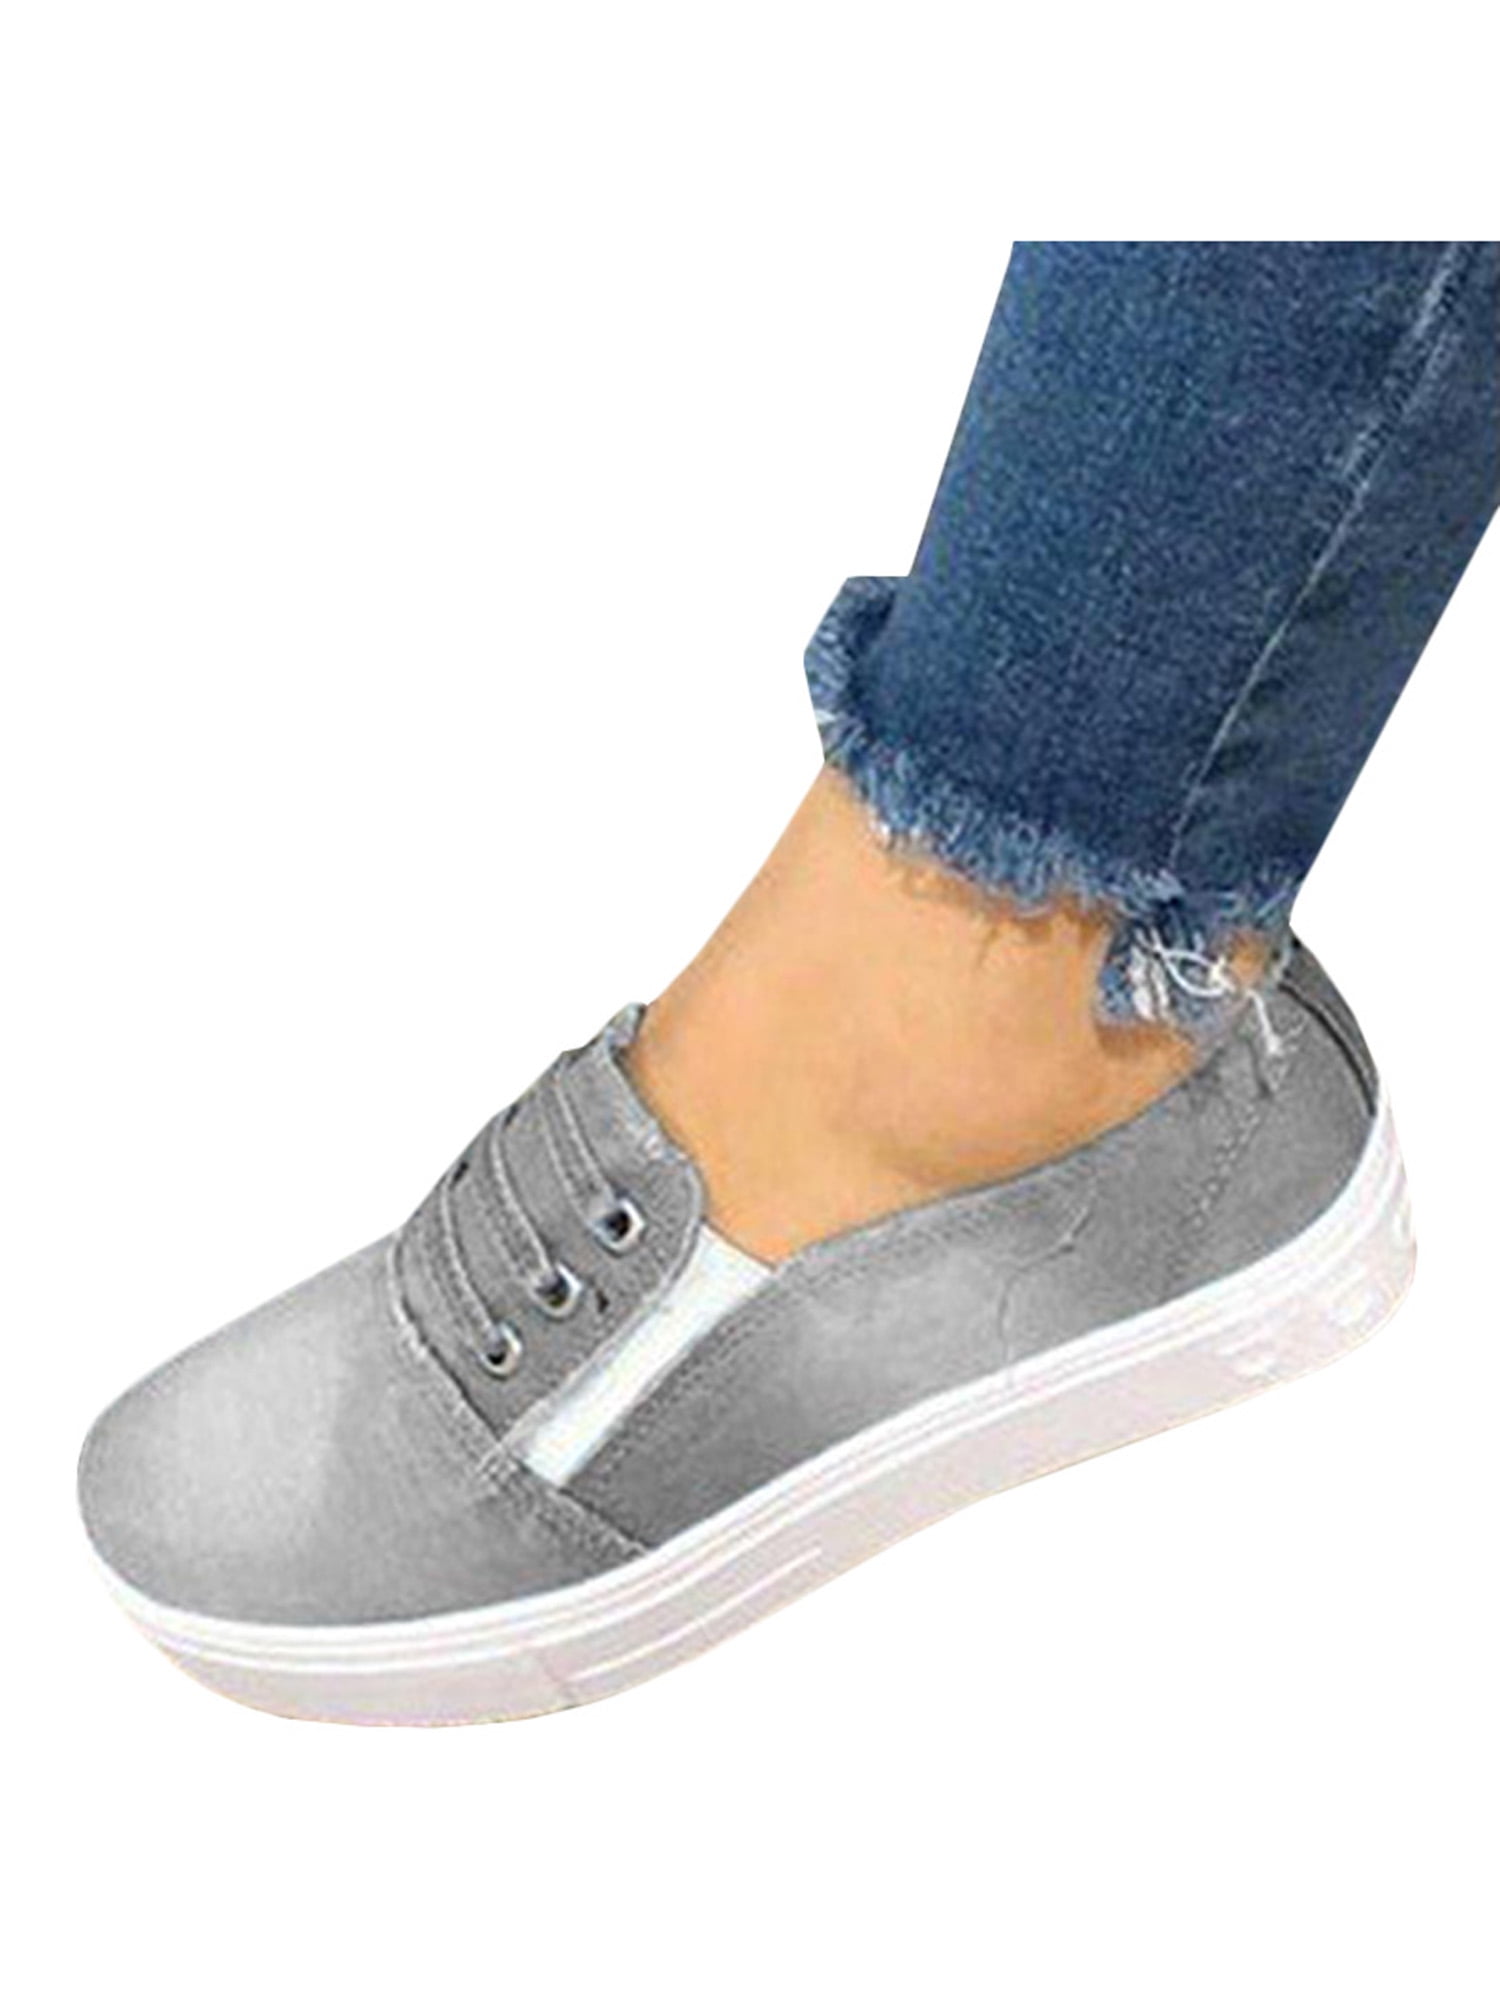 slip on gray shoes